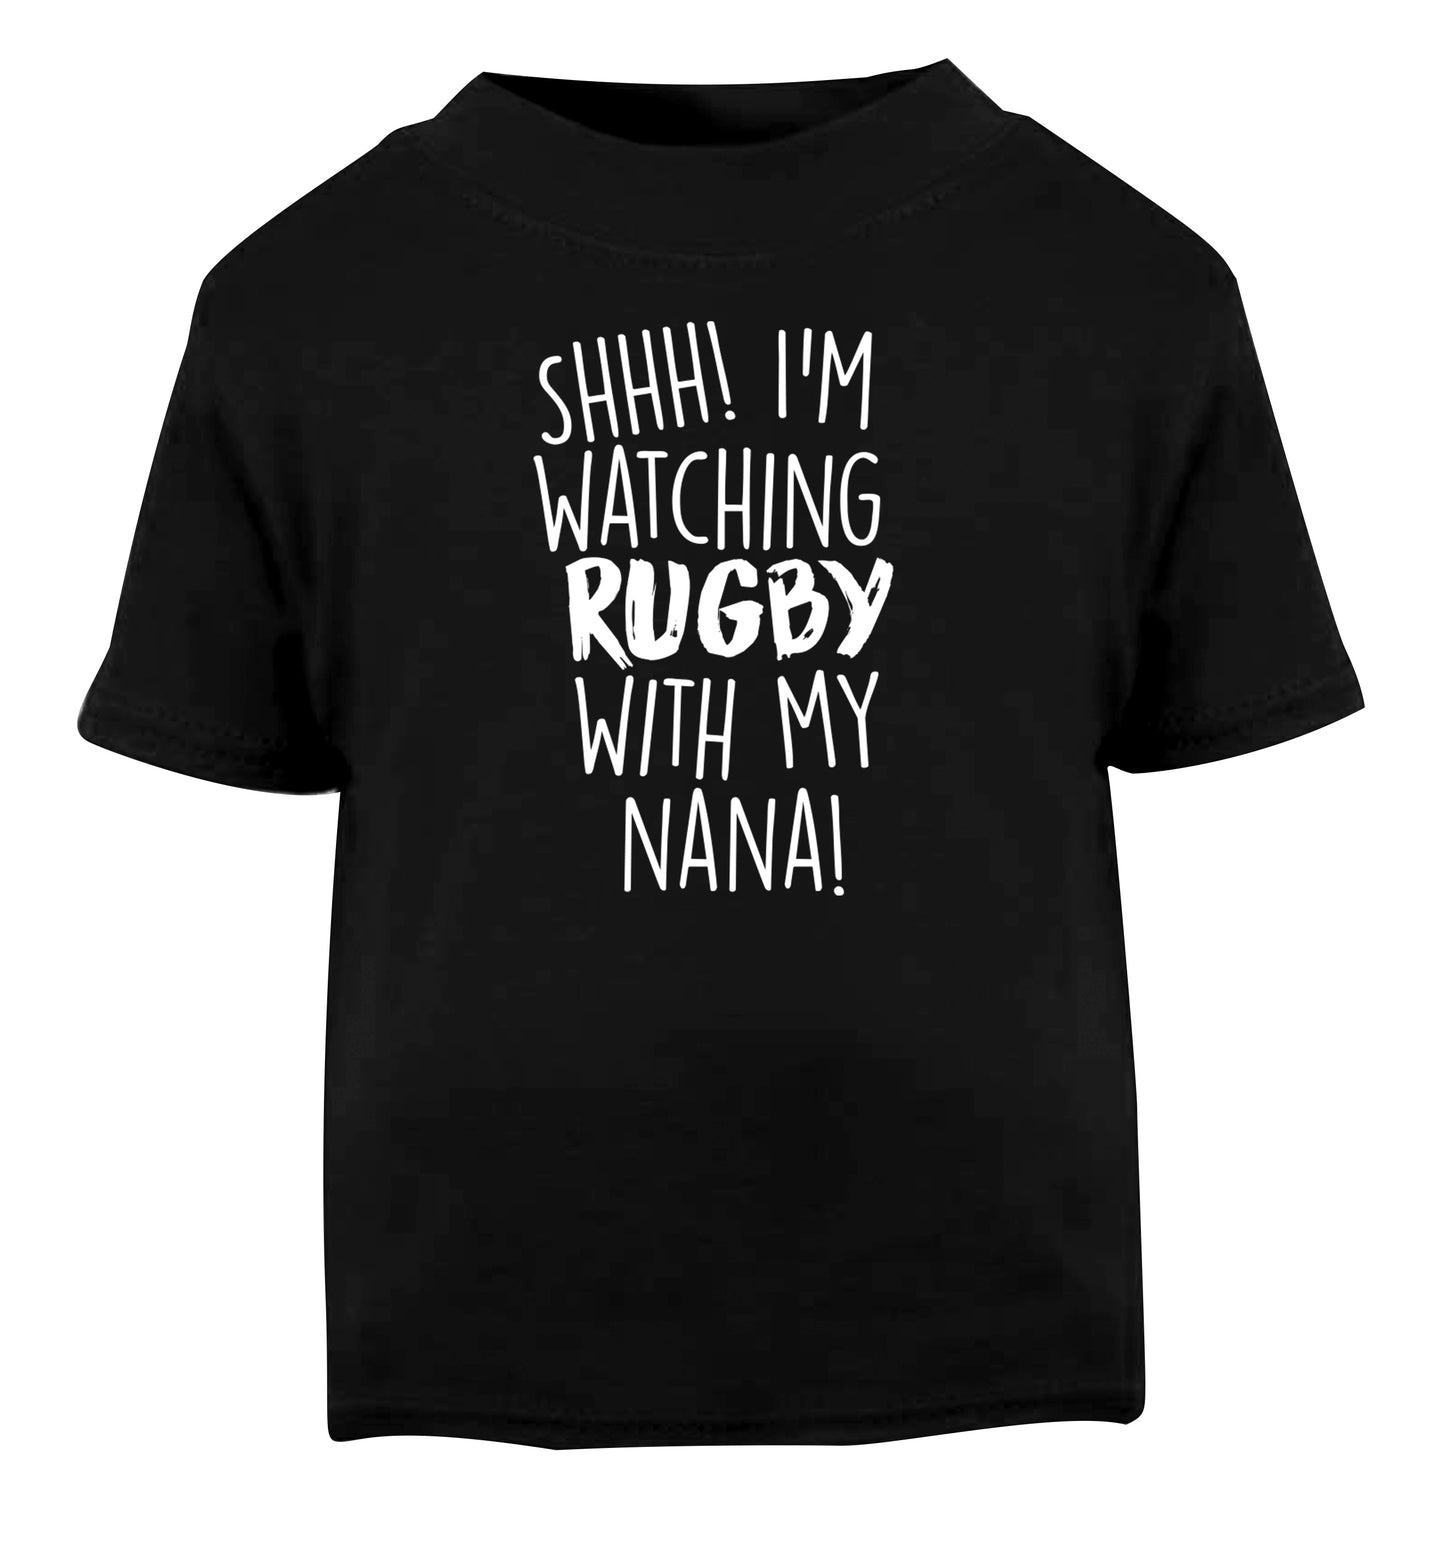 Shh I'm watching rugby with my nana Black Baby Toddler Tshirt 2 years